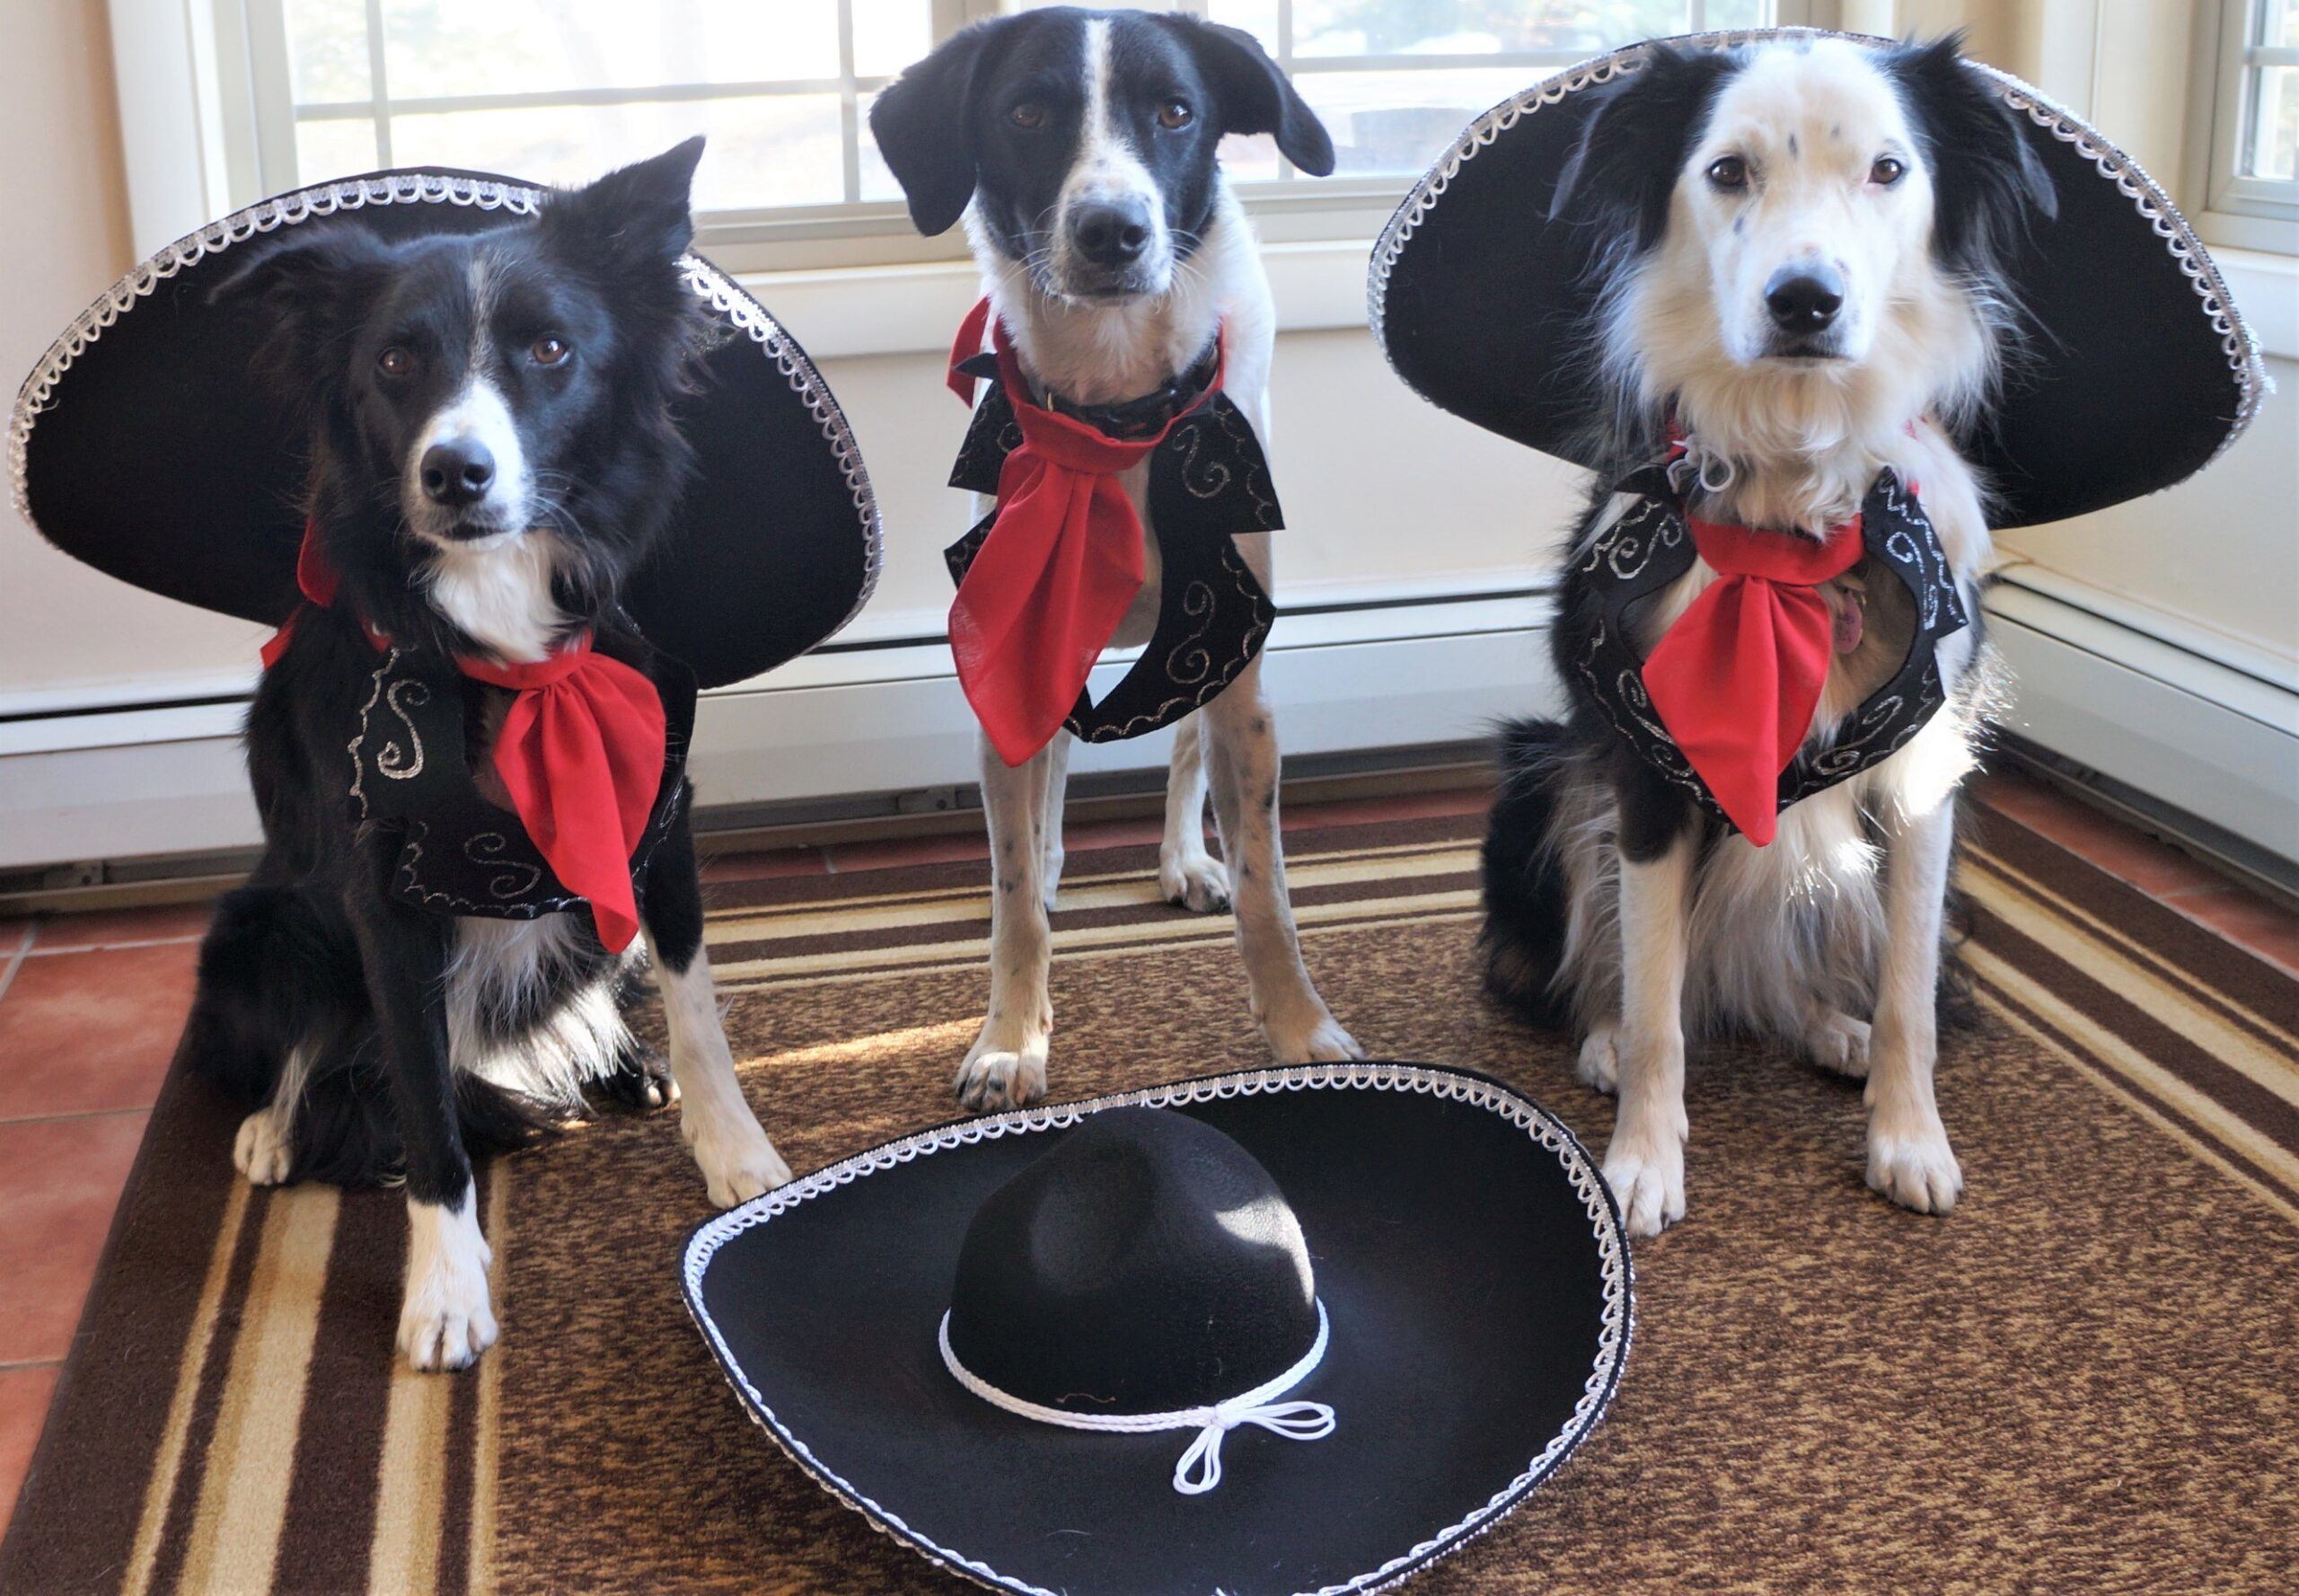 3 black and white dogs dressed as 3 amigos, dog in the middle is not wearing his sombrero. It's on the floor in front of him. The dogs on either side have their sombreros strapped behind their shoulders. 